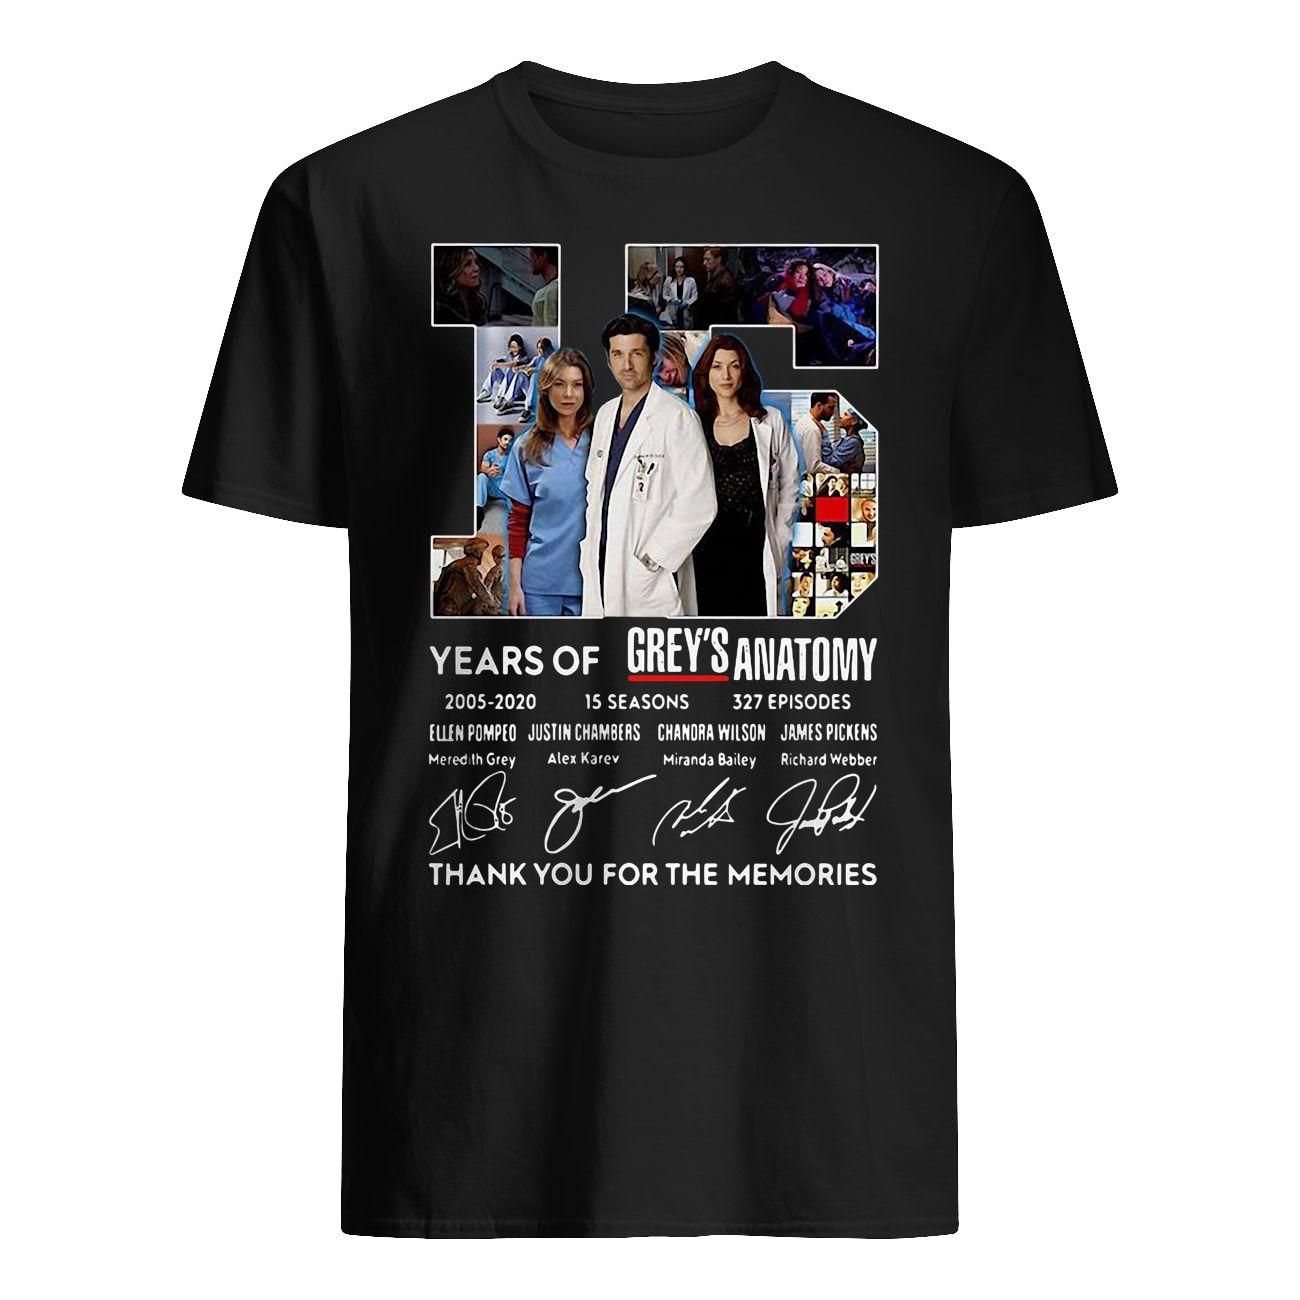 15 Years Of Grey’s atomy 2005-2020 Thank You For The Memories Signature T-shirt